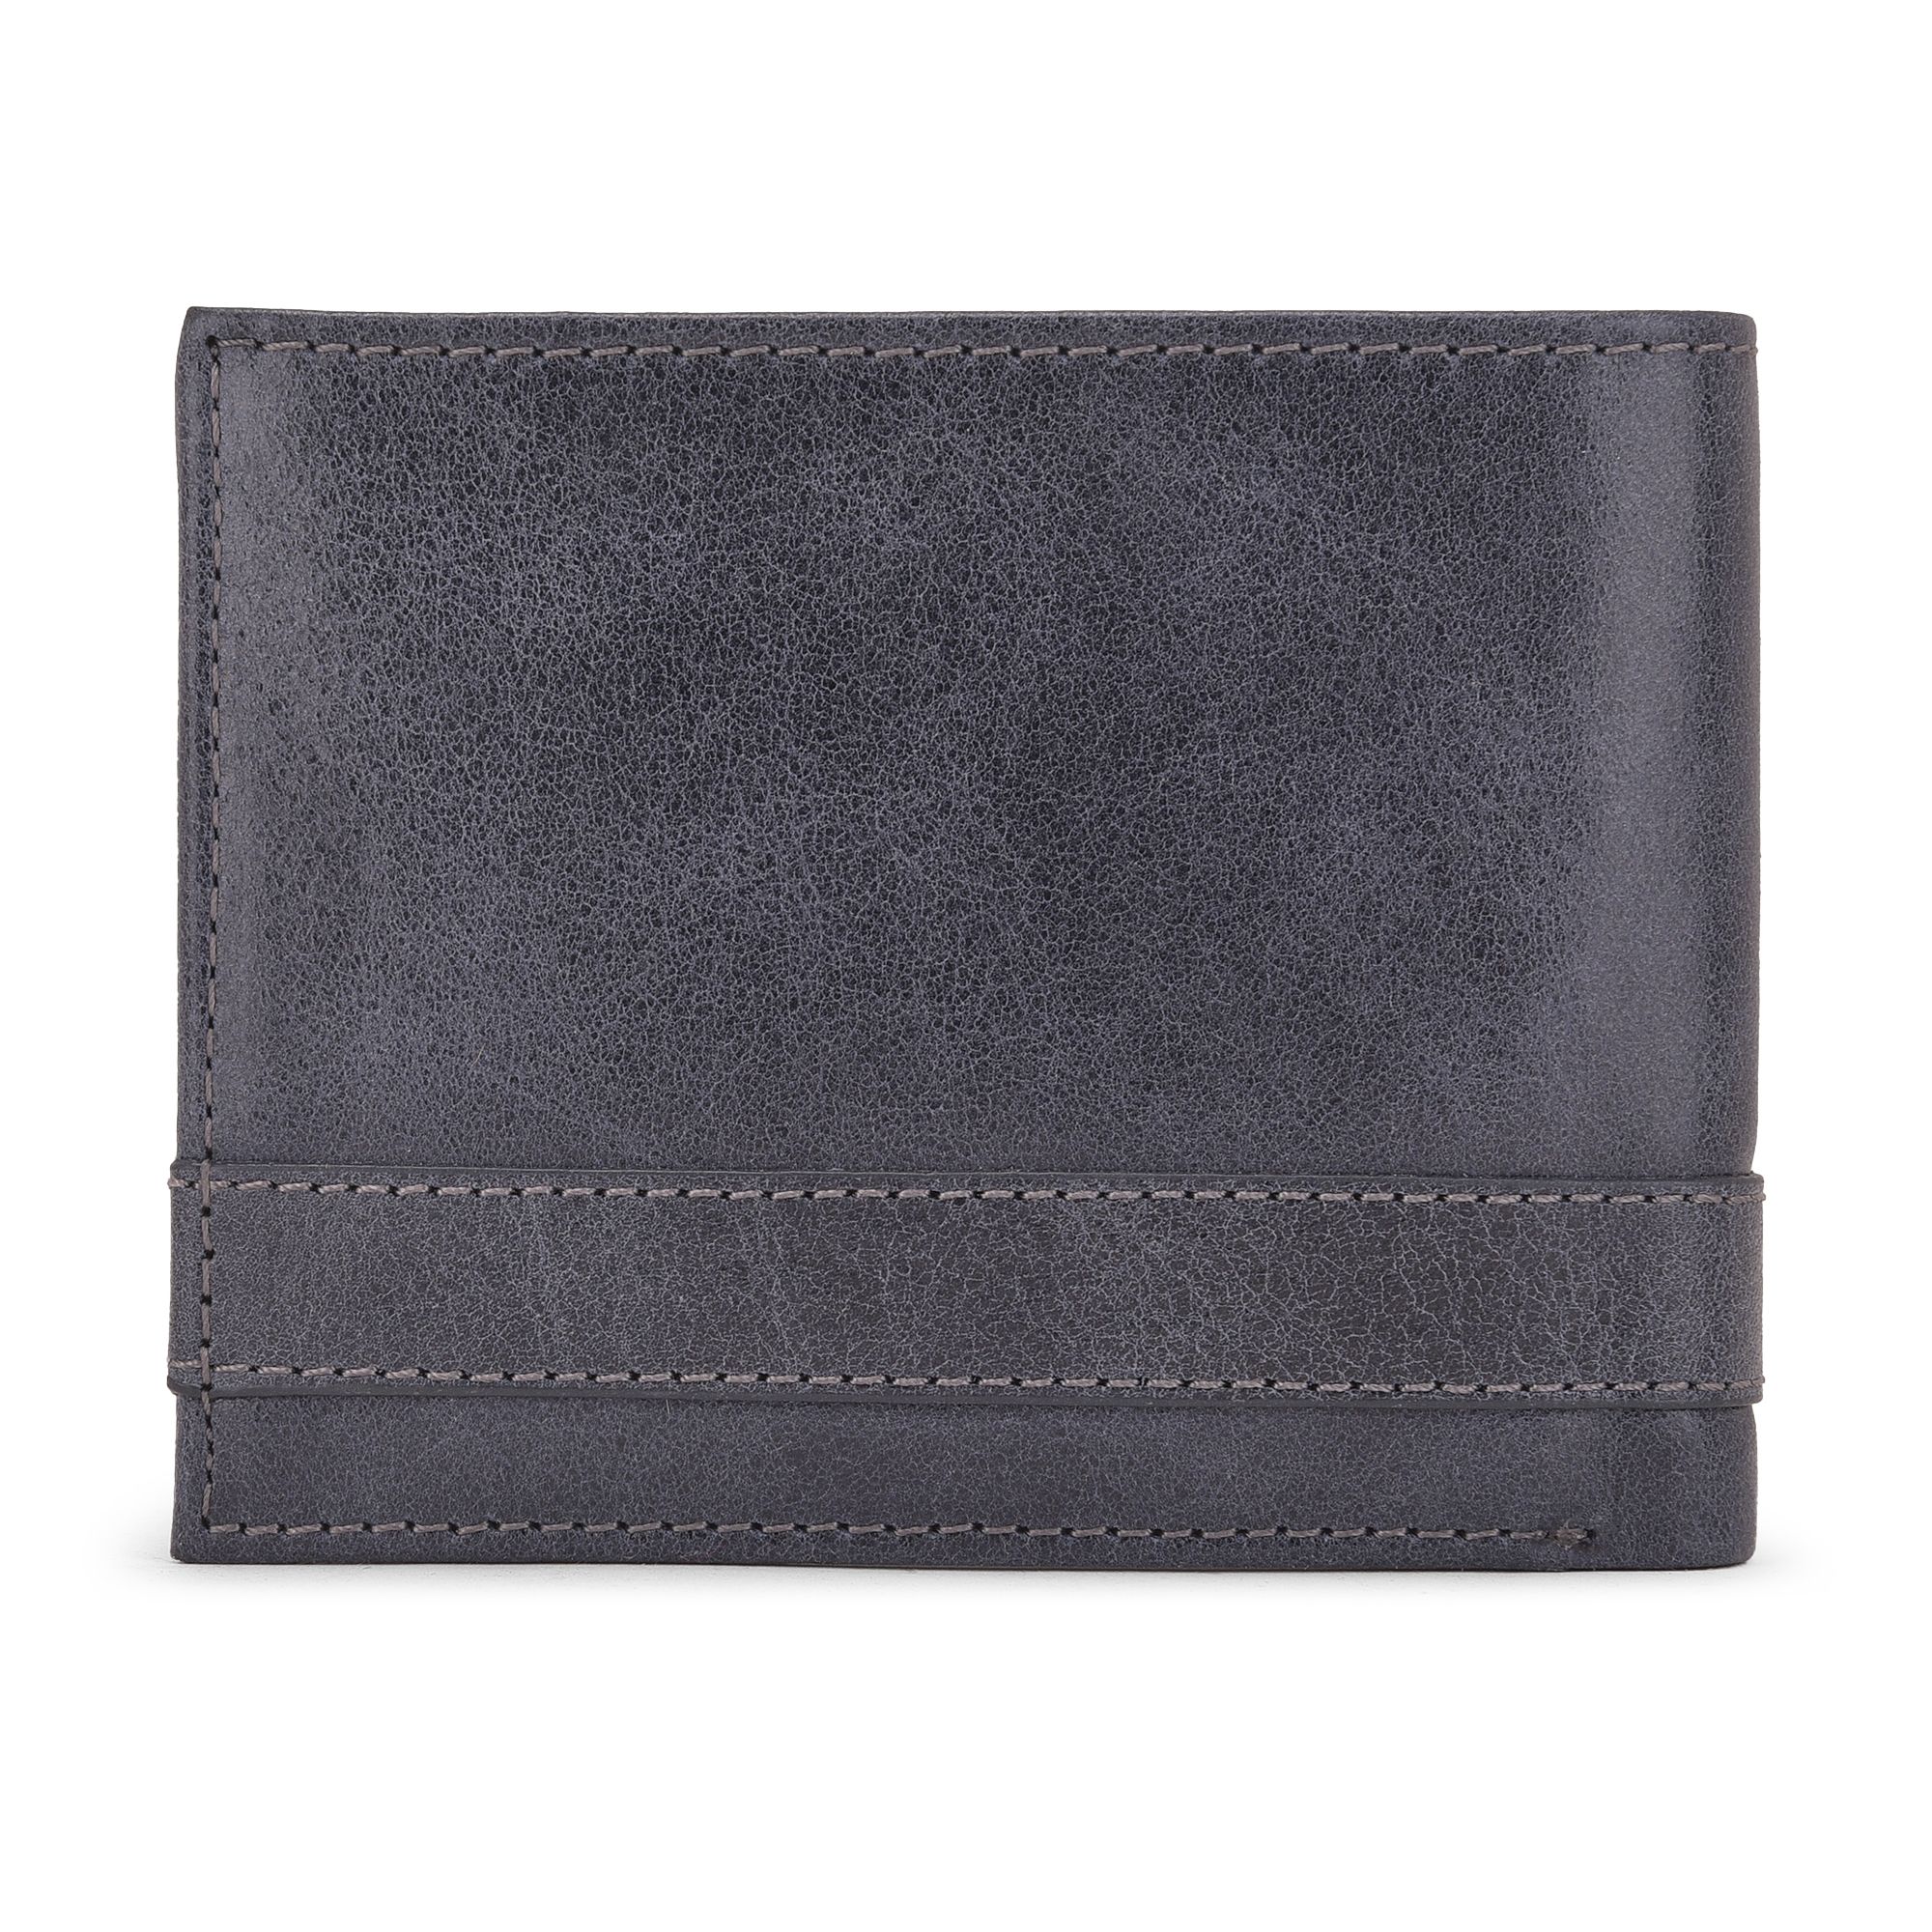 Navy bifold leather wallet